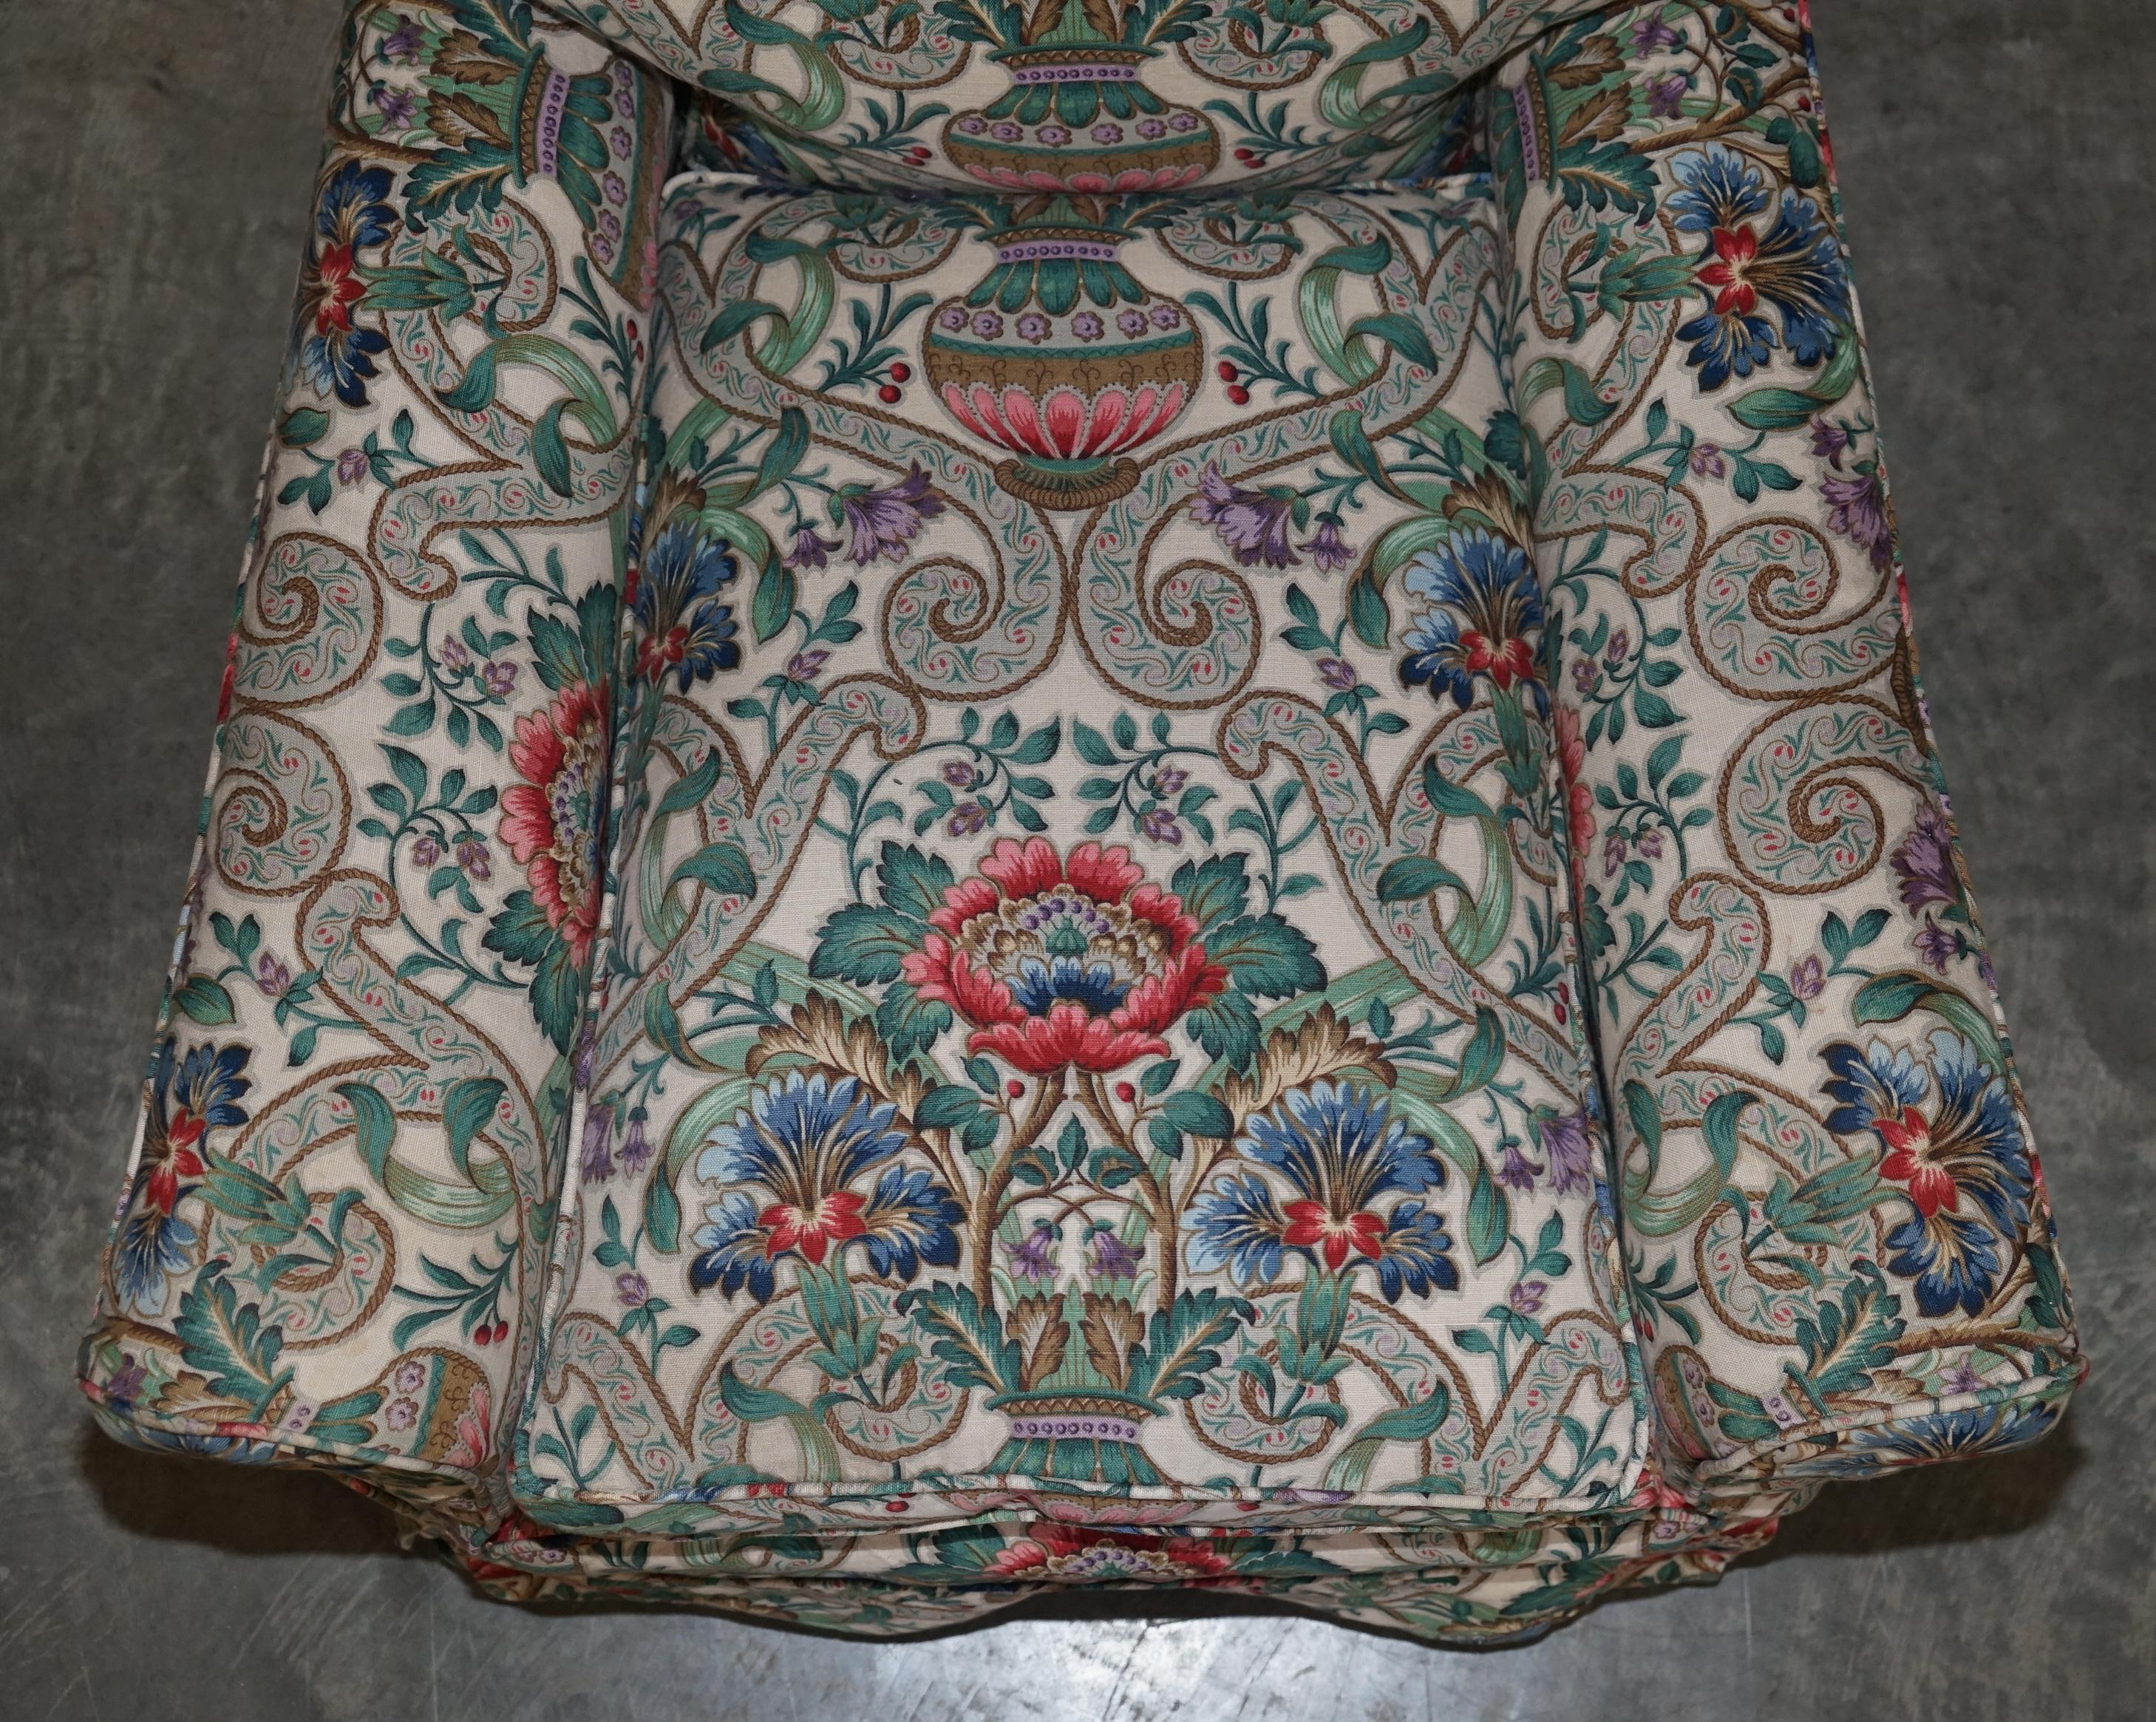 English Antique Victorian circa 1900 Club Armchair with Chintz Embroidered Upholstery For Sale